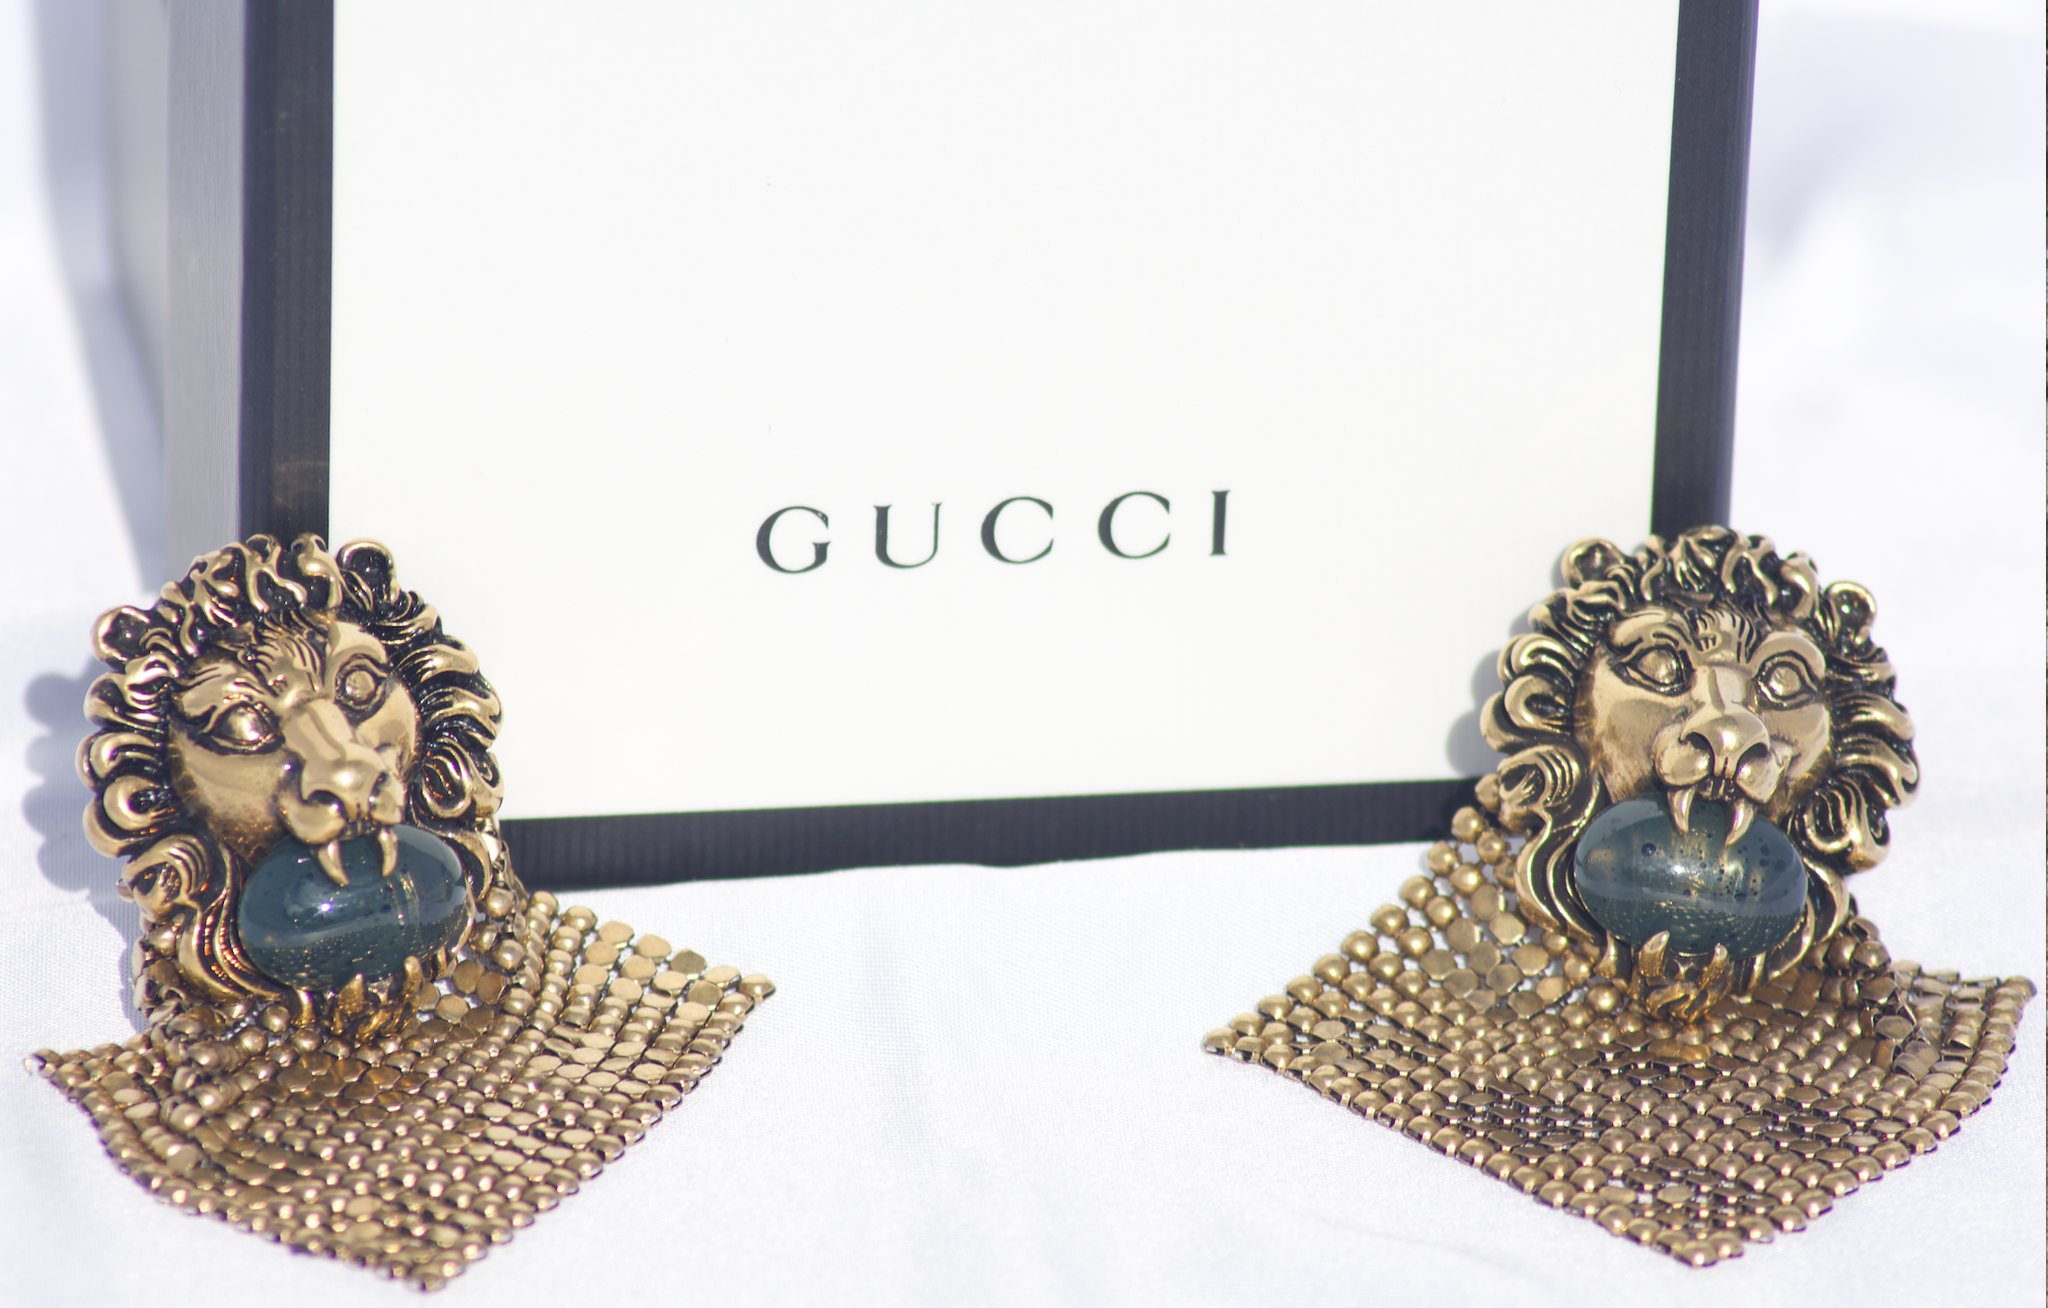 Gucci Lion Head Clip-on Earrings in Antique Gold – 